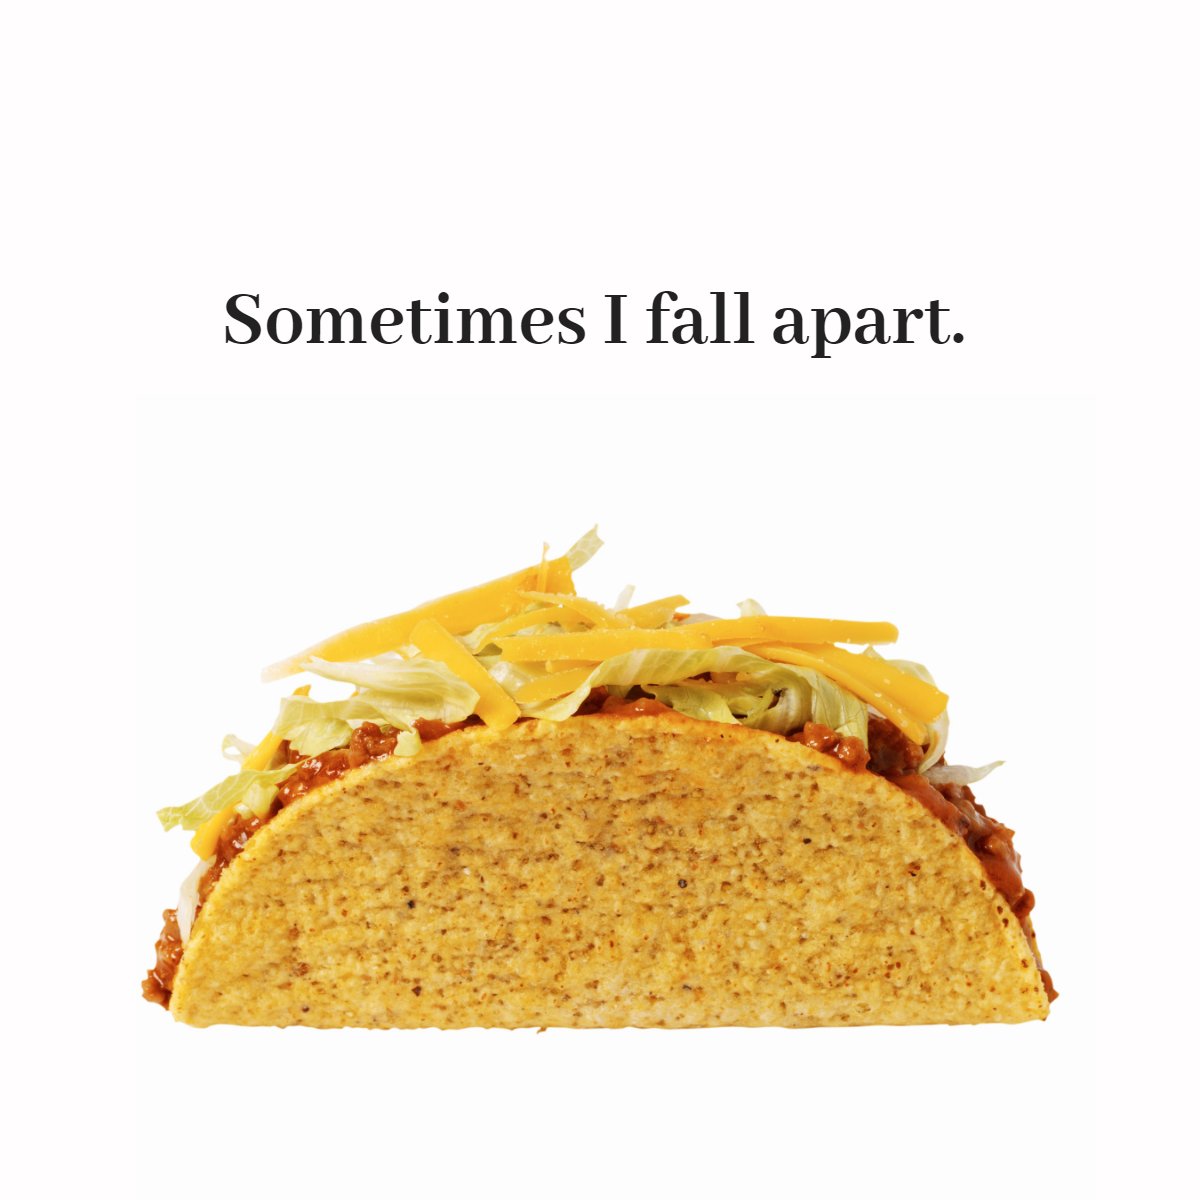 It’s ok if you fall apart sometimes.

Tacos fall apart and we still love them. 🌮 ❤️

#itsokay #fun #funnyinspo #taco #tacolover #instaquotes
 #actualinstagramhomes #firsttimebuyer #actualhomesofinstagram #newbuildhouse #interiordesign #nexthome #homedesign